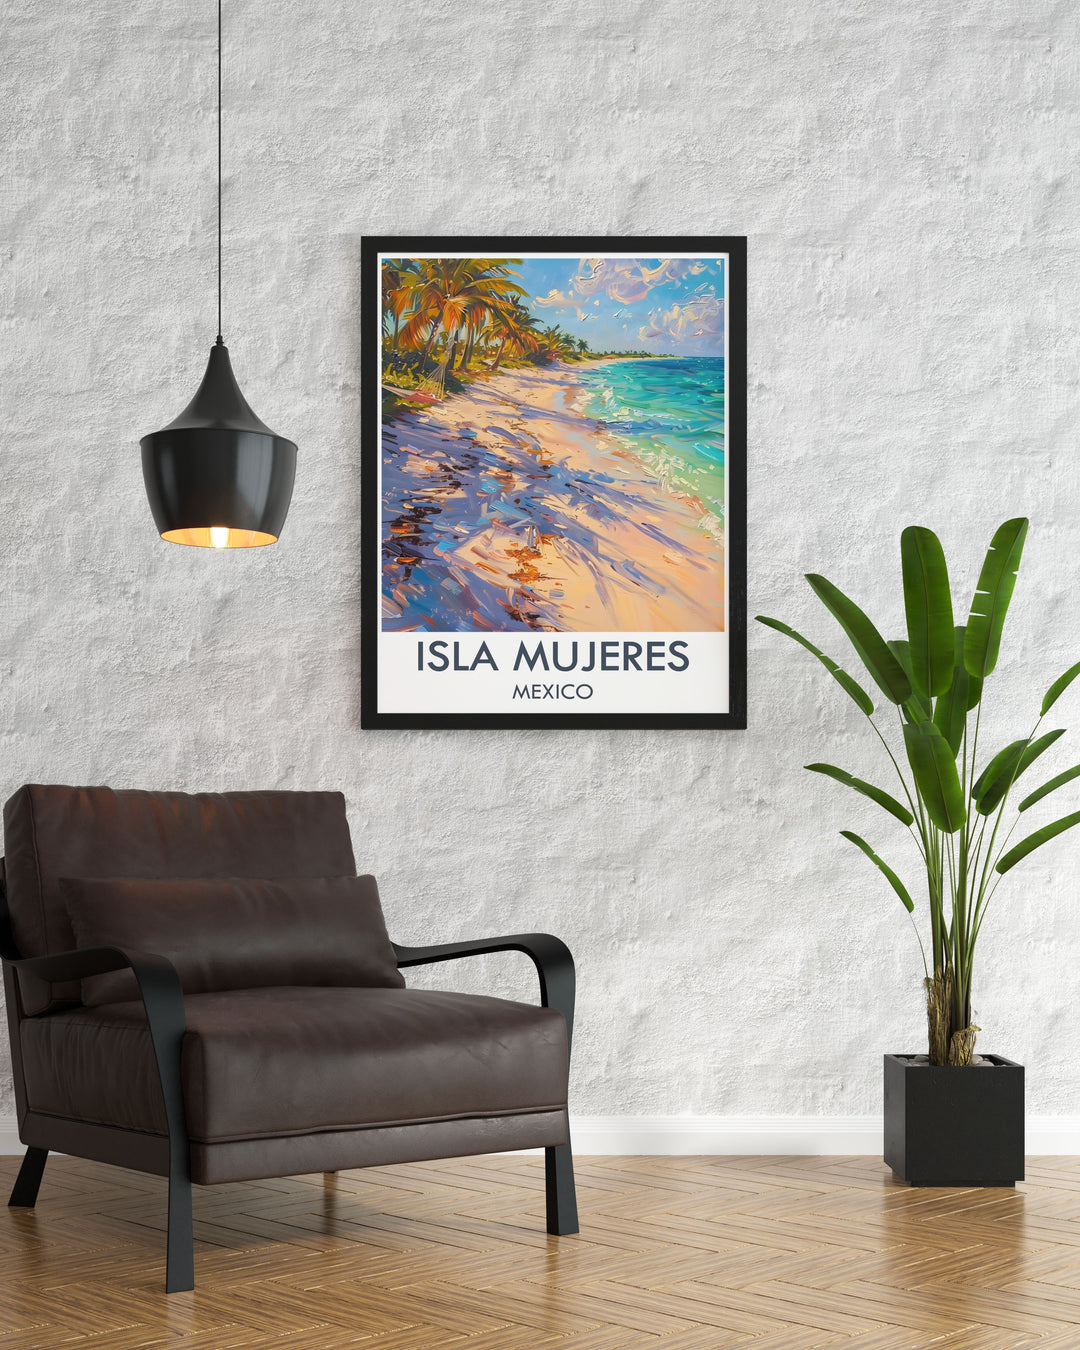 Modern wall decor highlighting the stunning coastal views and clear waters of Playa Norte, perfect for creating a tranquil and refreshing environment in your living space.